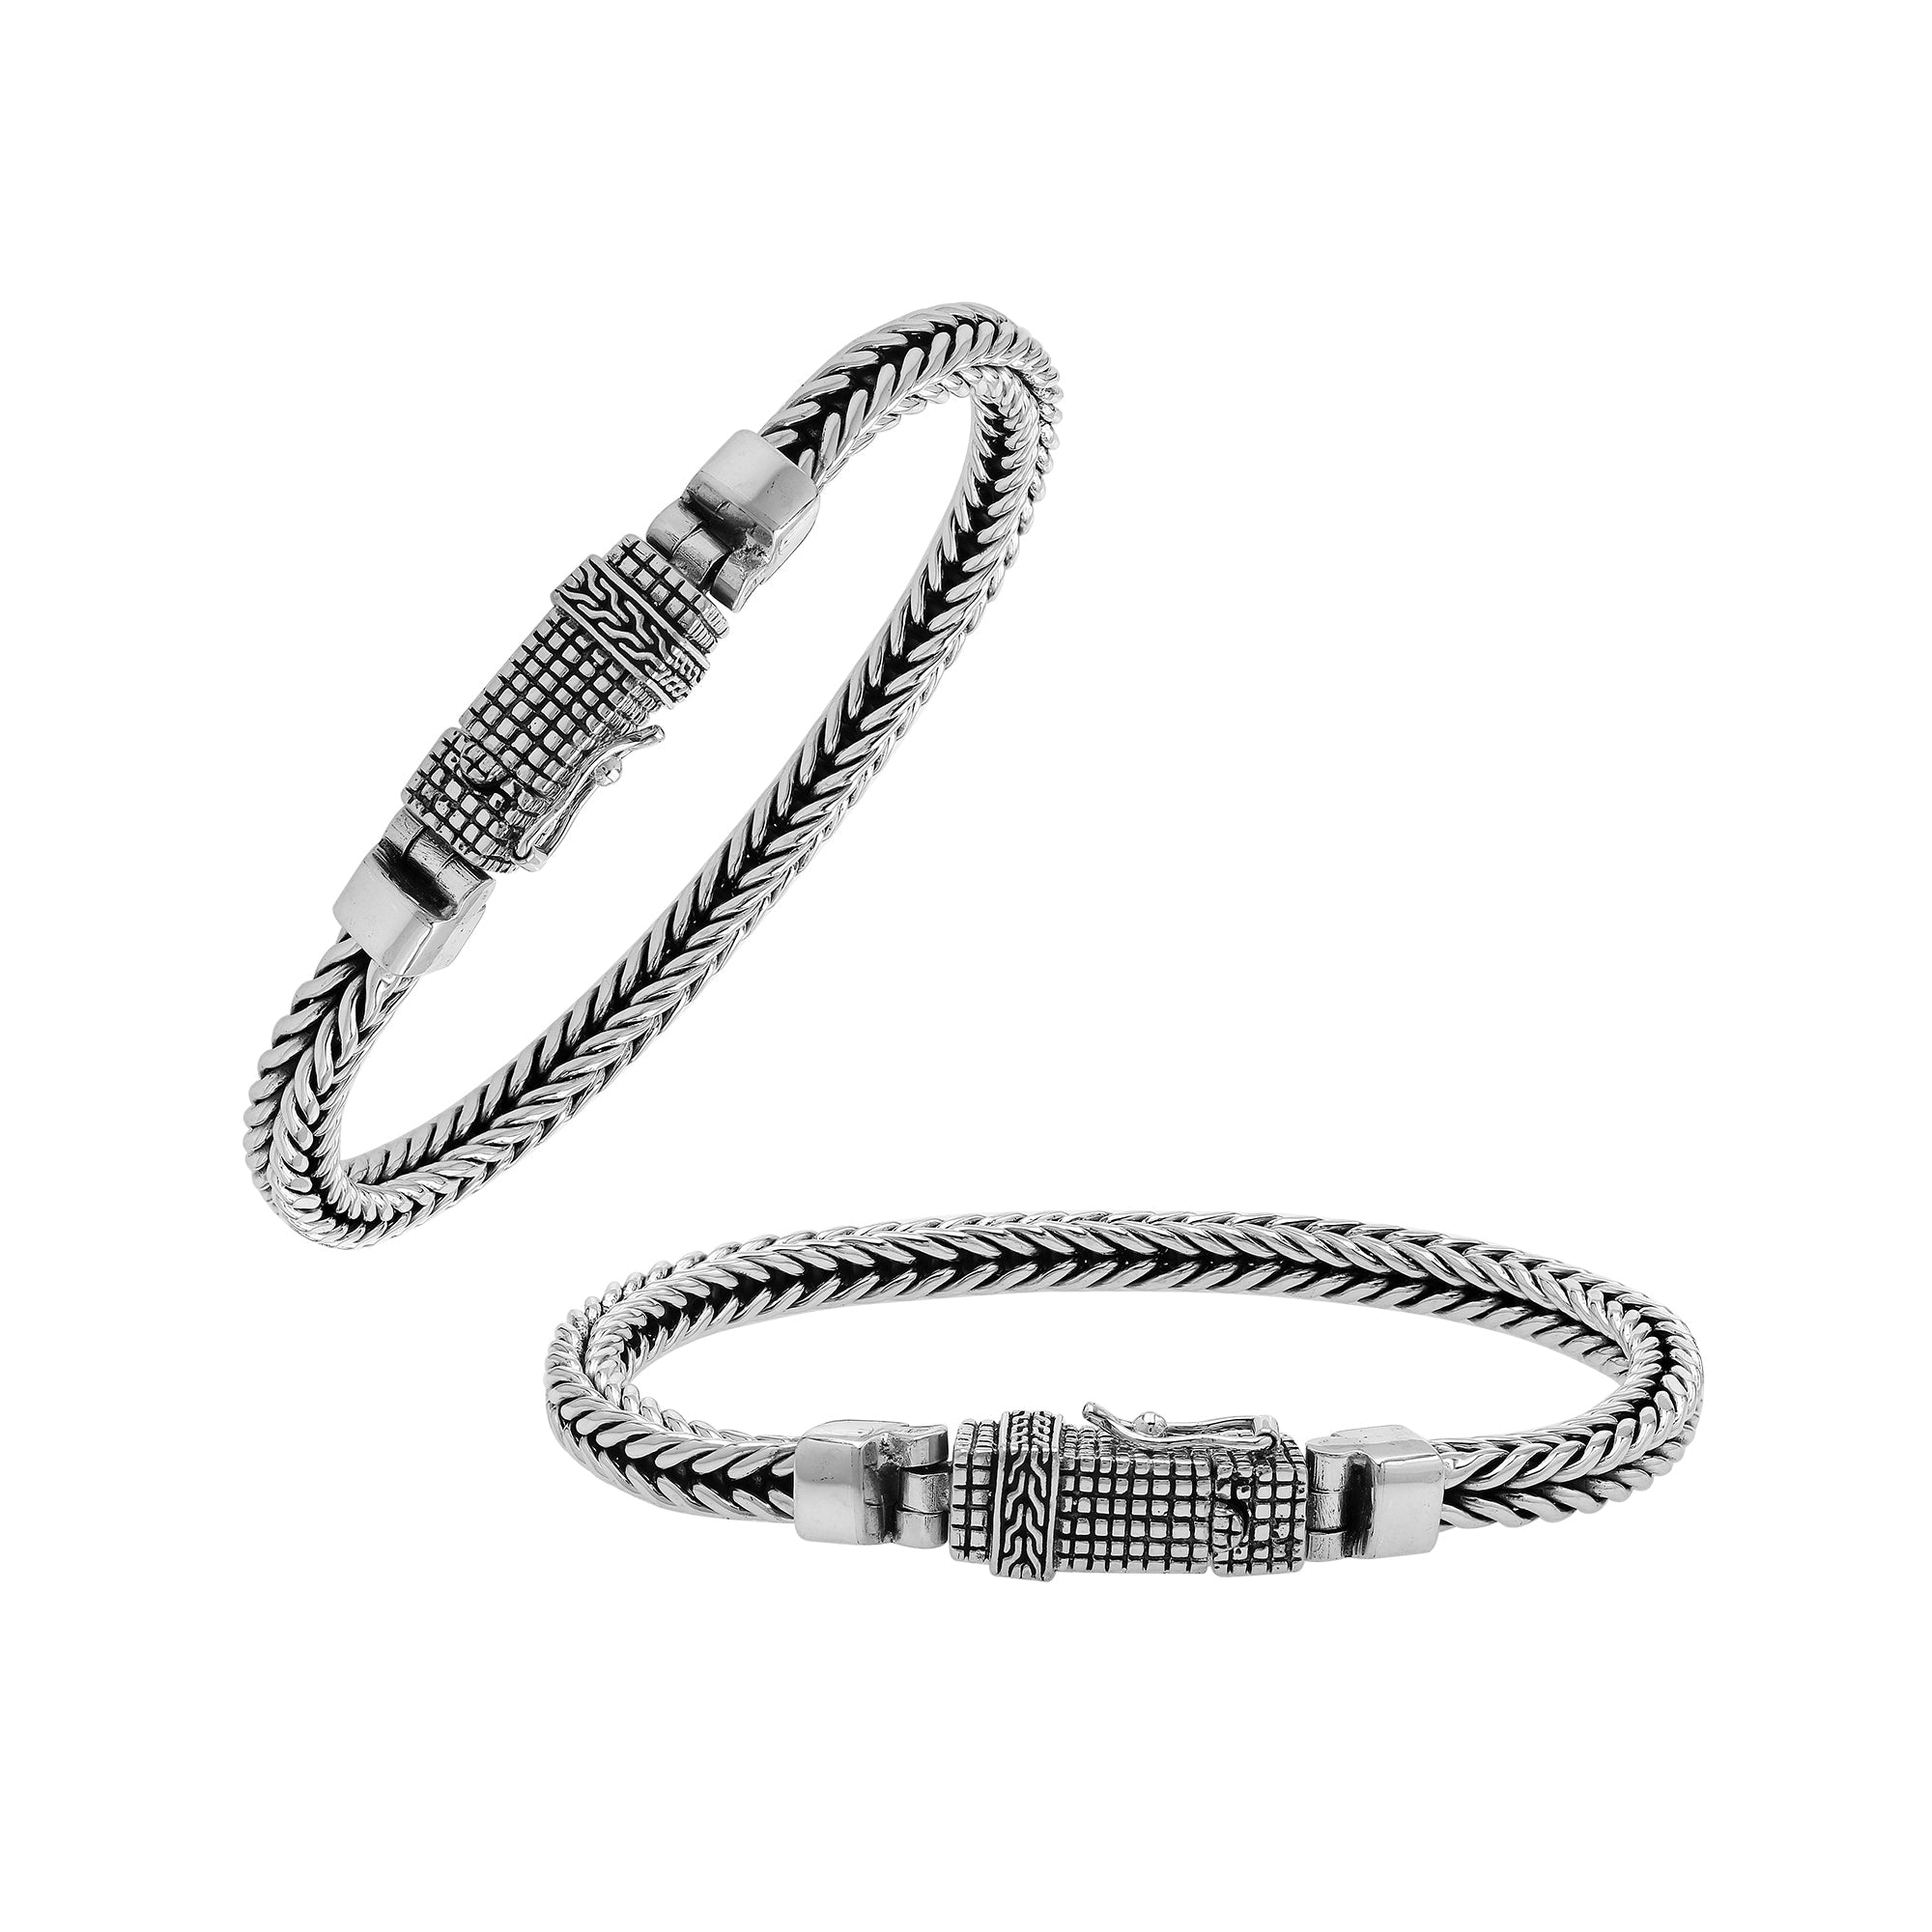 AB-1187-S-8.5 Sterling Silver Bracelet With Plain Silver